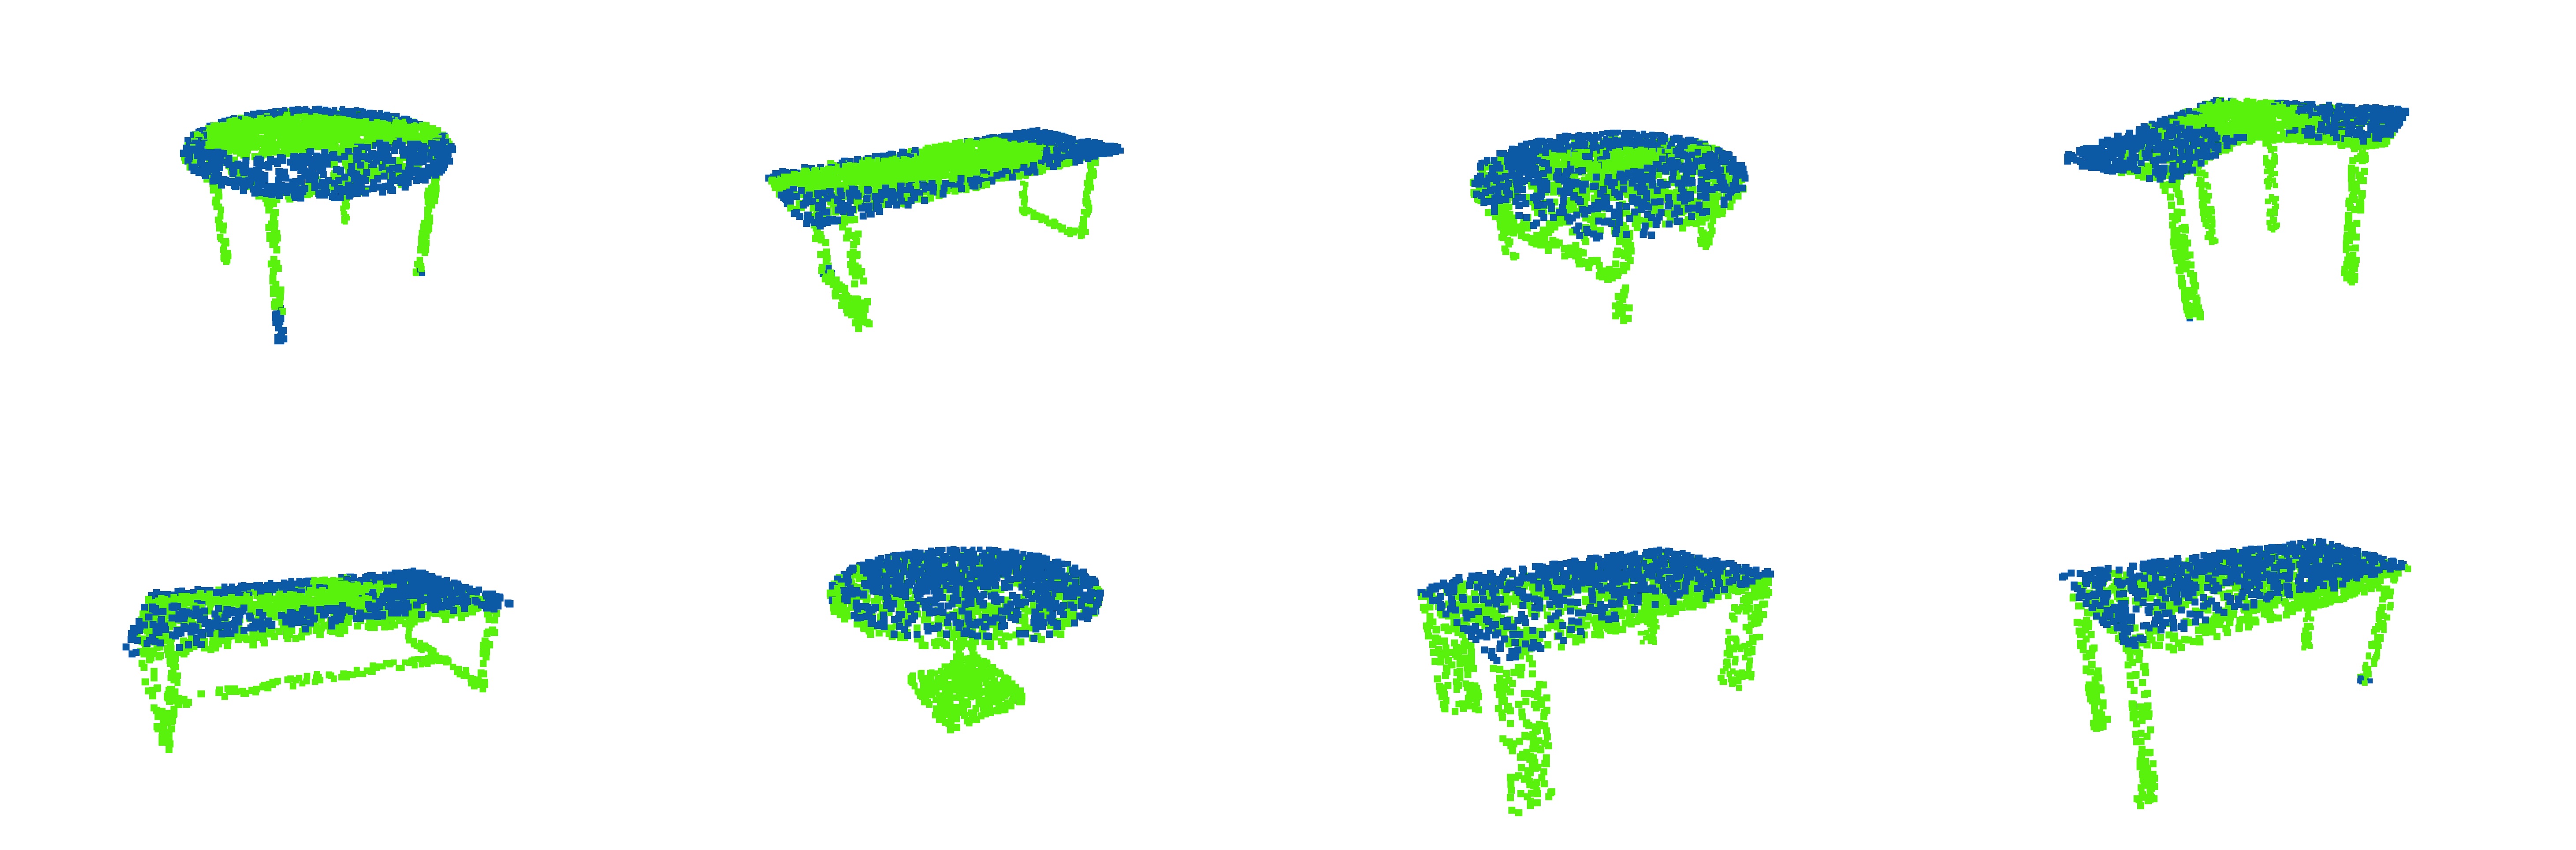 plane detection using deep learning approach figure 7